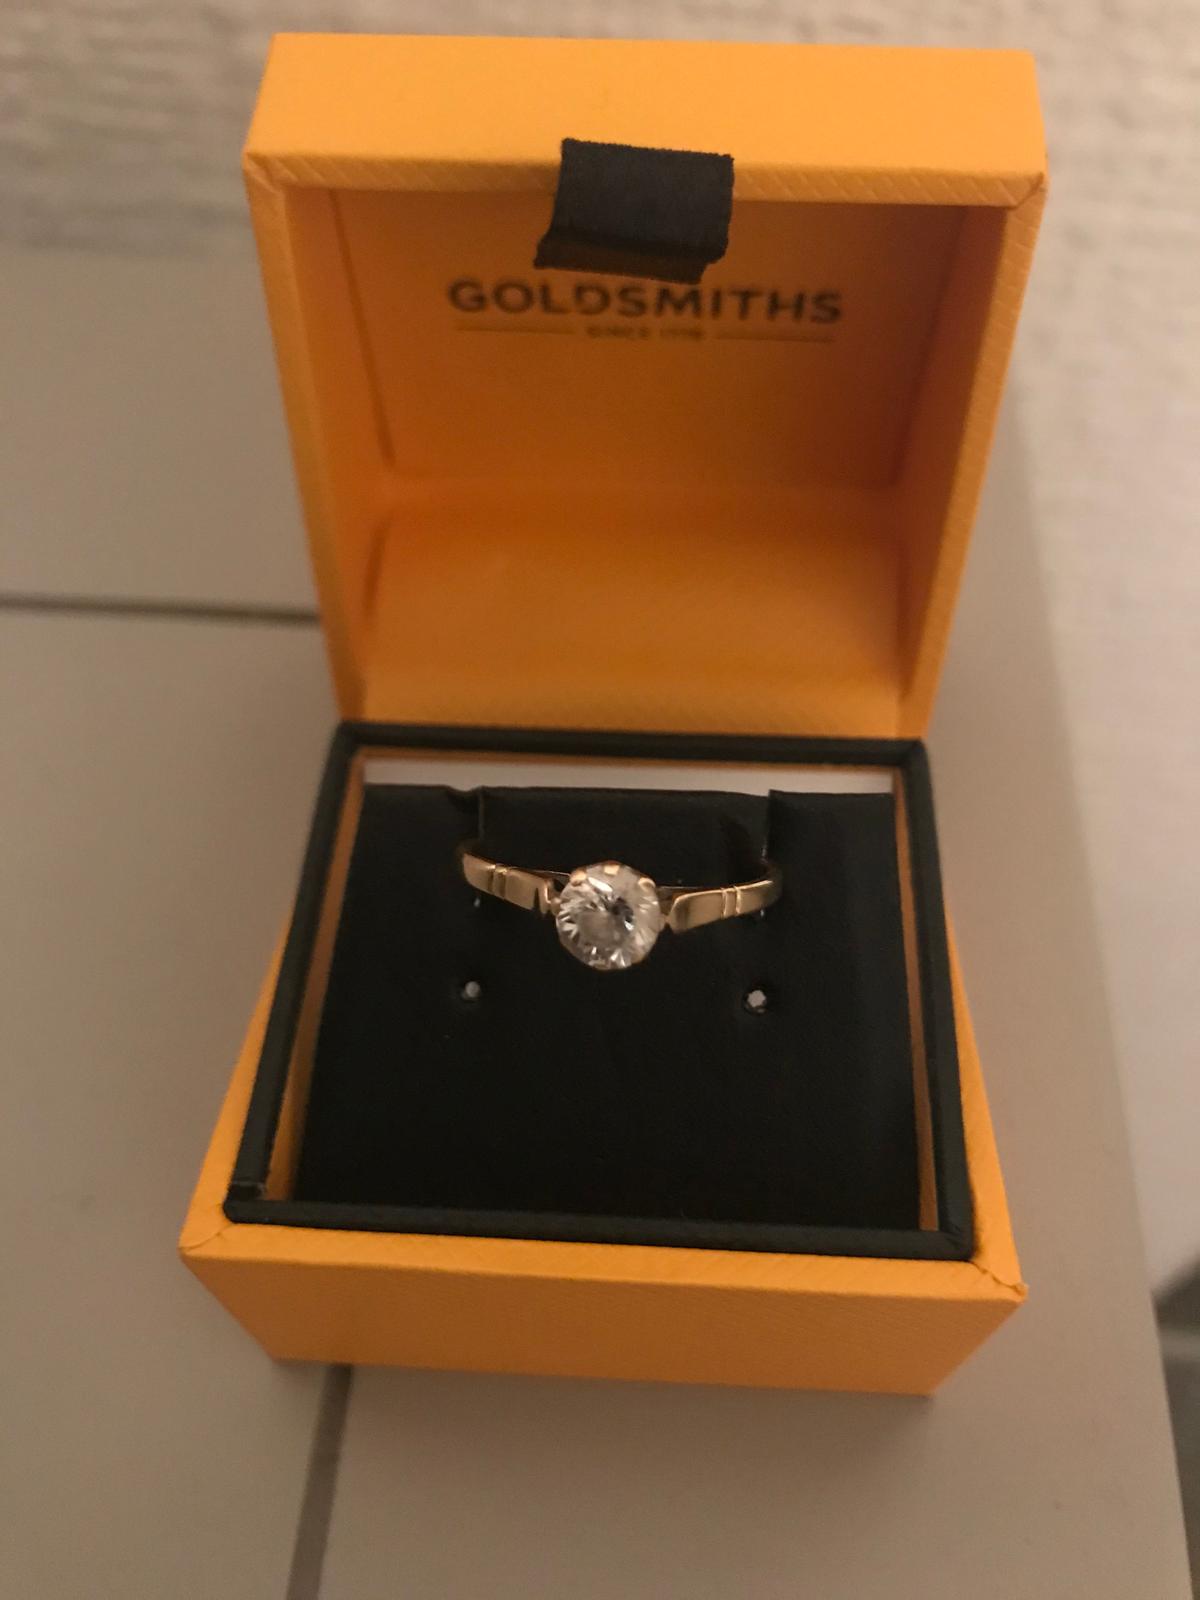 The ring given to Helen Marshall by Graeme Richardson. (SWNS)